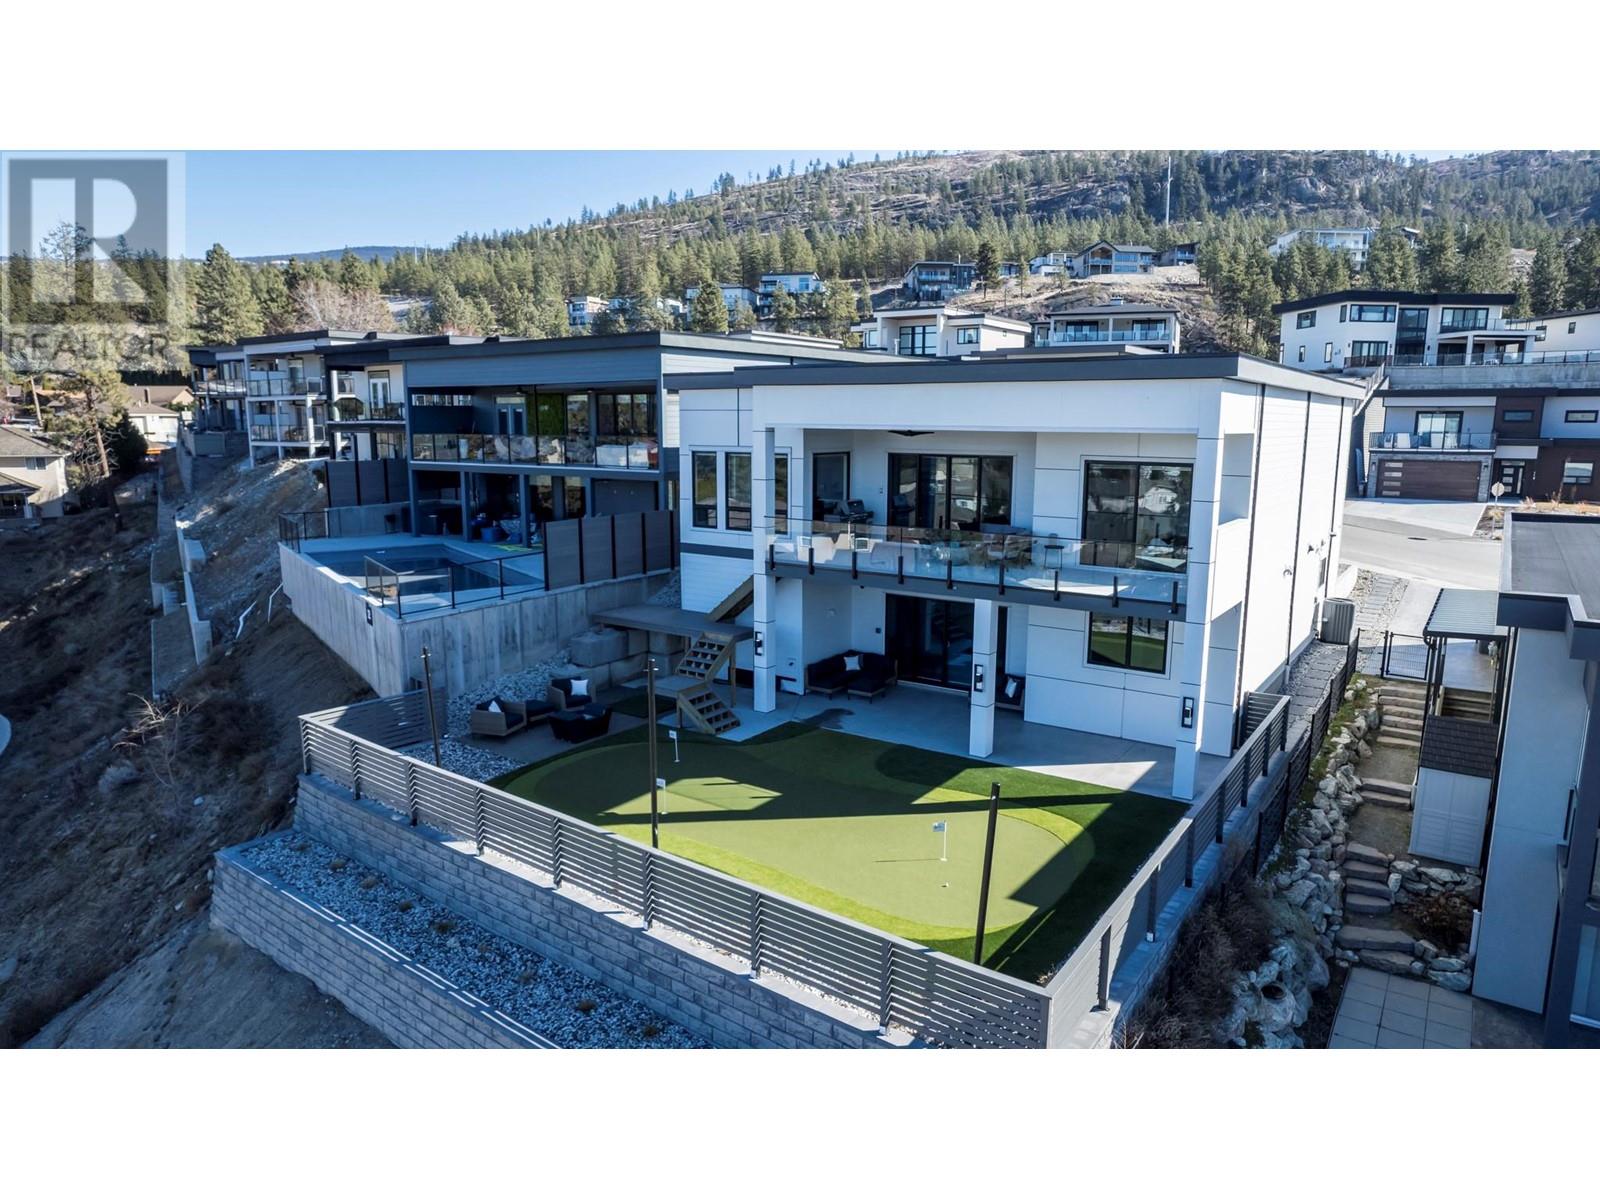  182 AVERY Place, Penticton